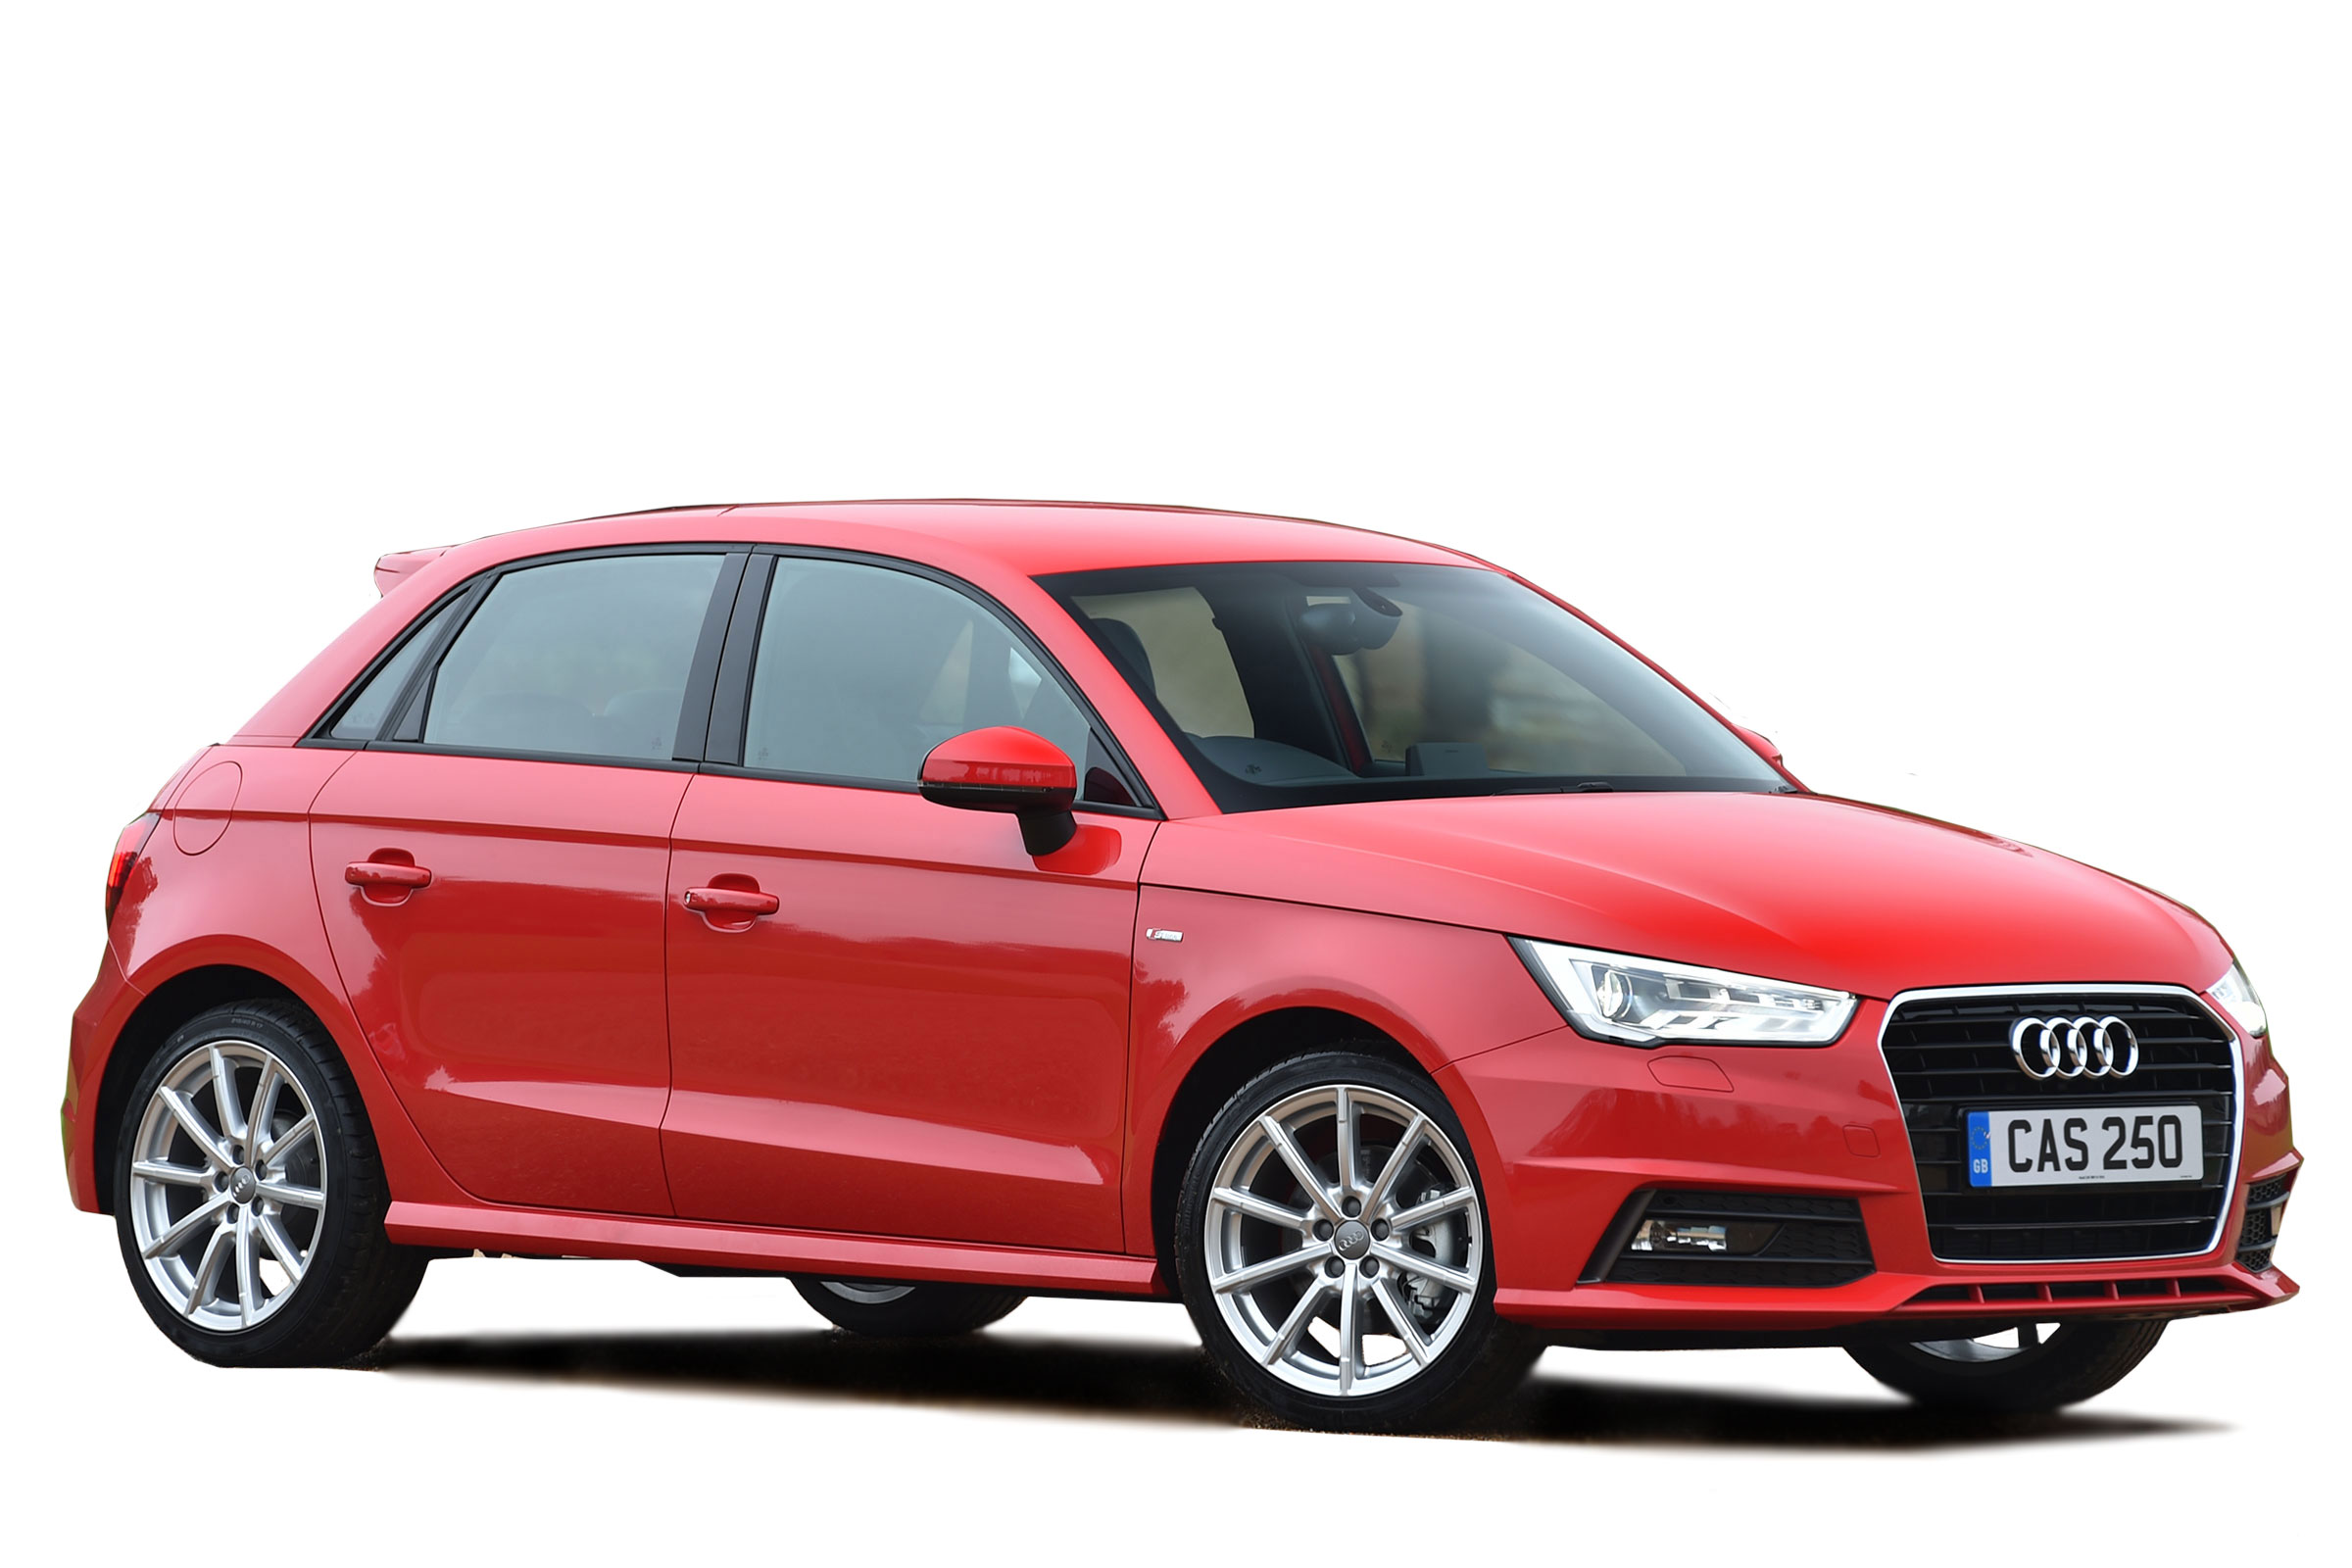 Nice wallpapers Audi A1 2400x1600px